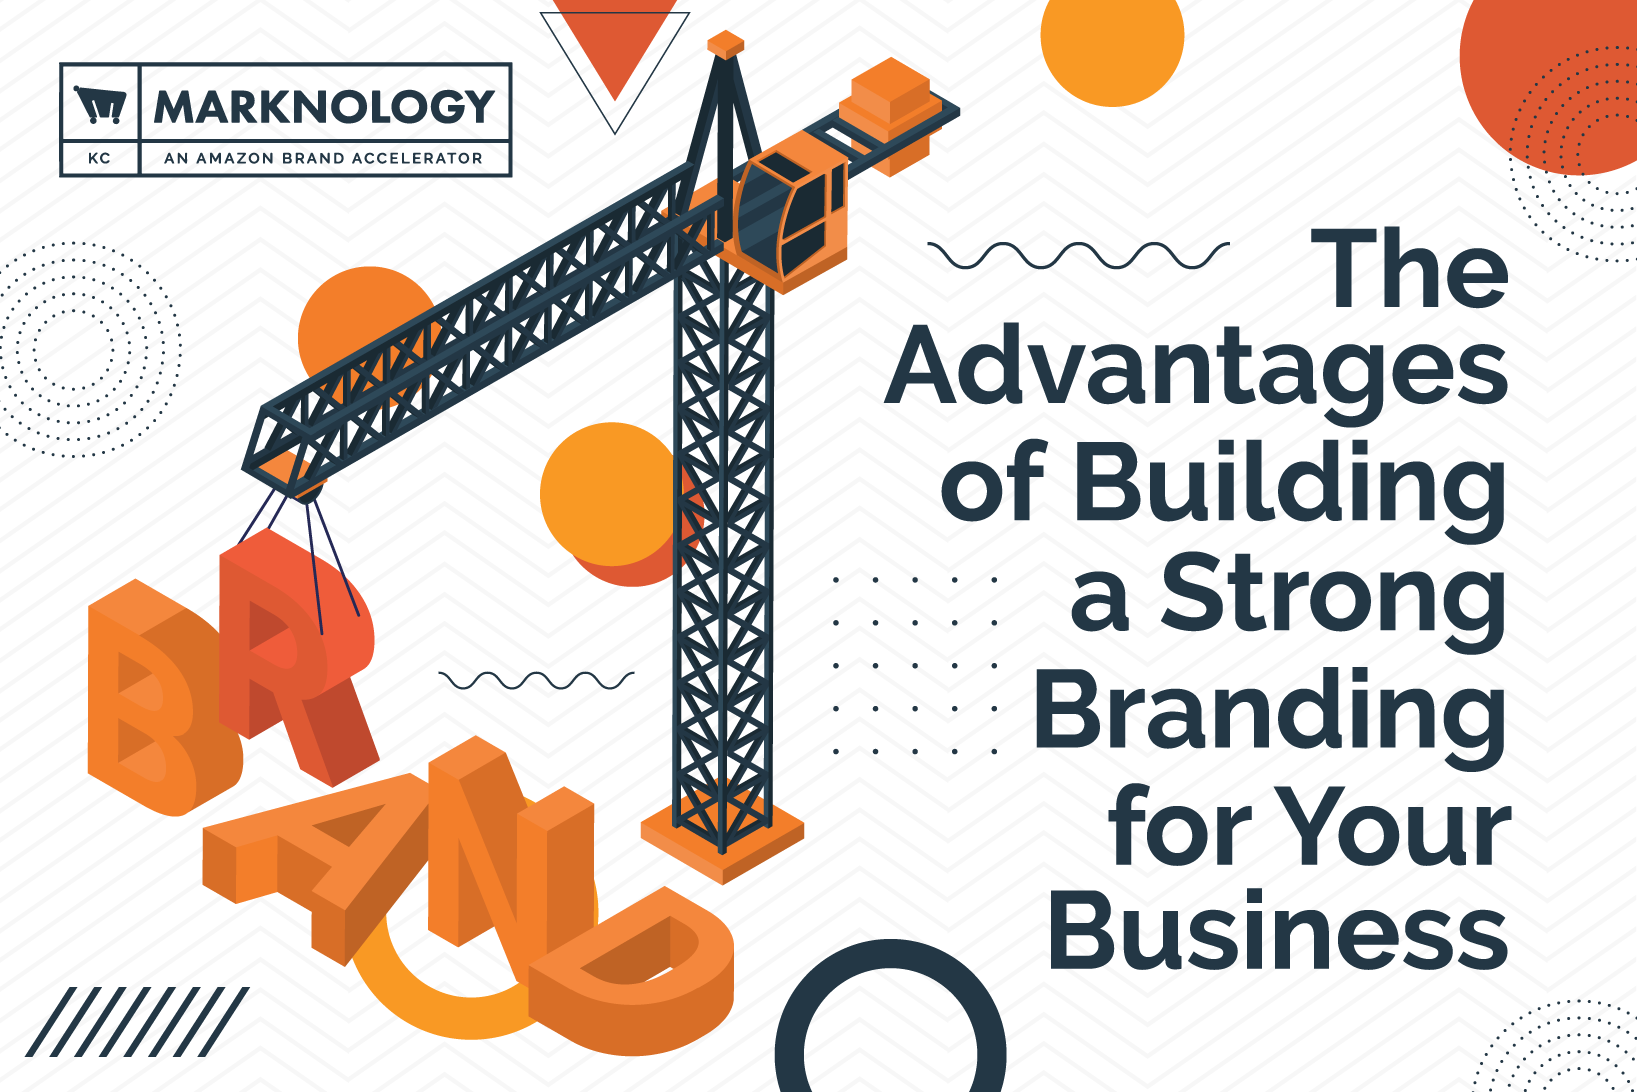 The Advantages of Building a Strong Branding for Your Business